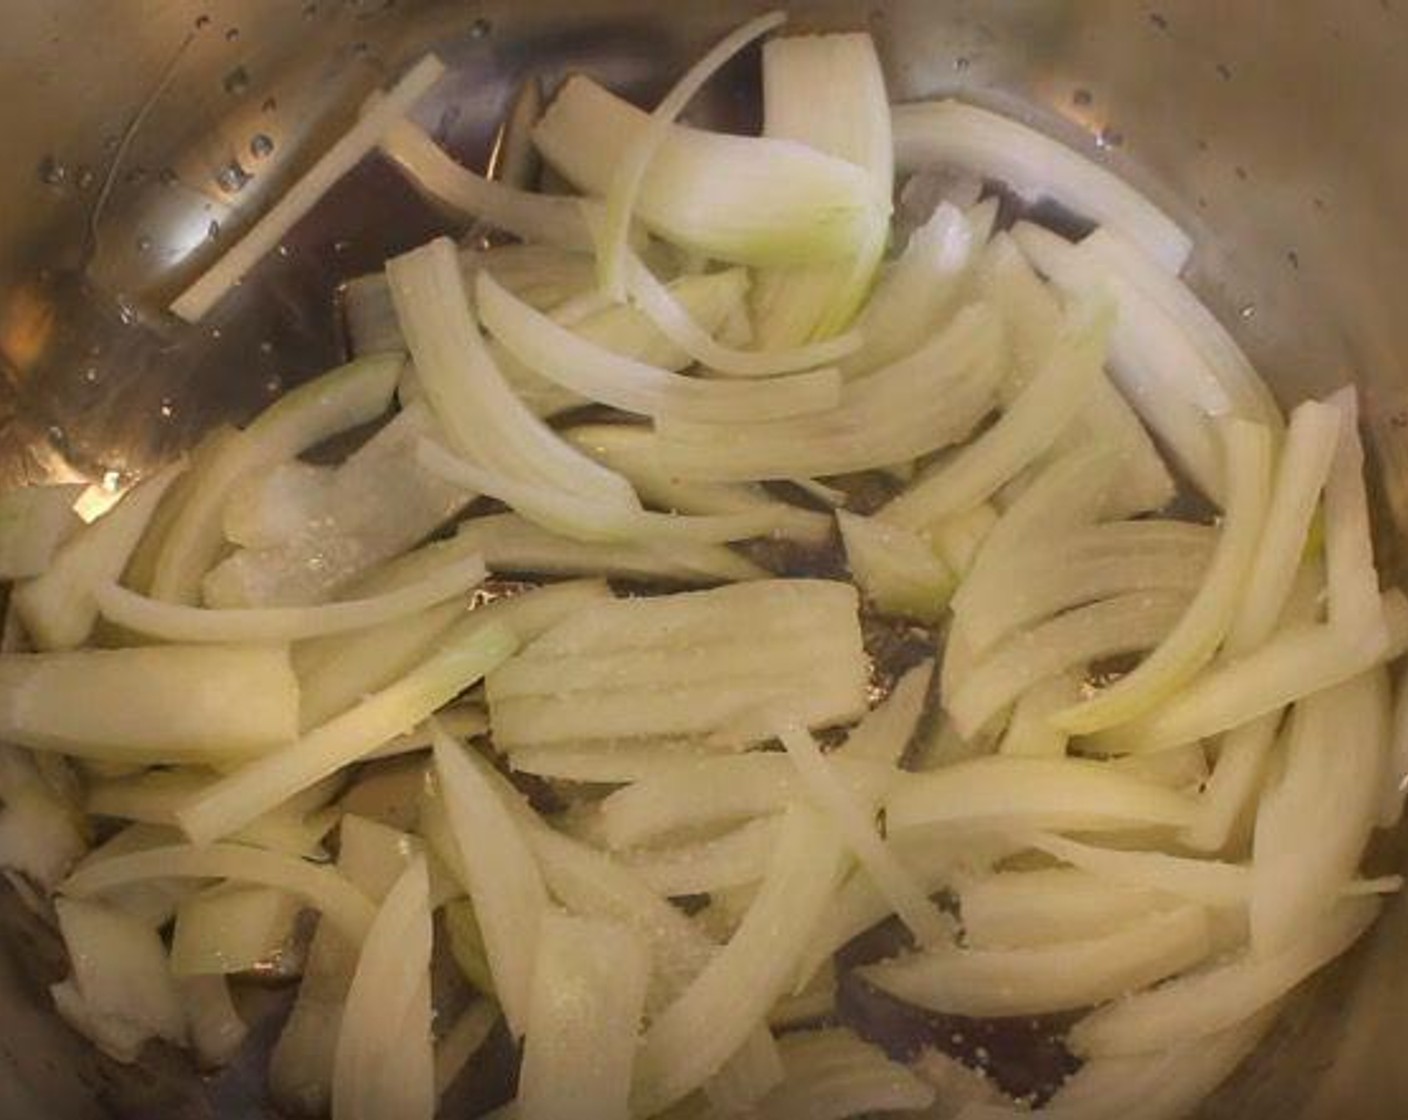 step 1 In a saucepan over low heat, add Vegetable Oil (1 Tbsp) and Onion (1). Season with Onion Powder (1/2 tsp). Cook for 20 minutes, or until soft.